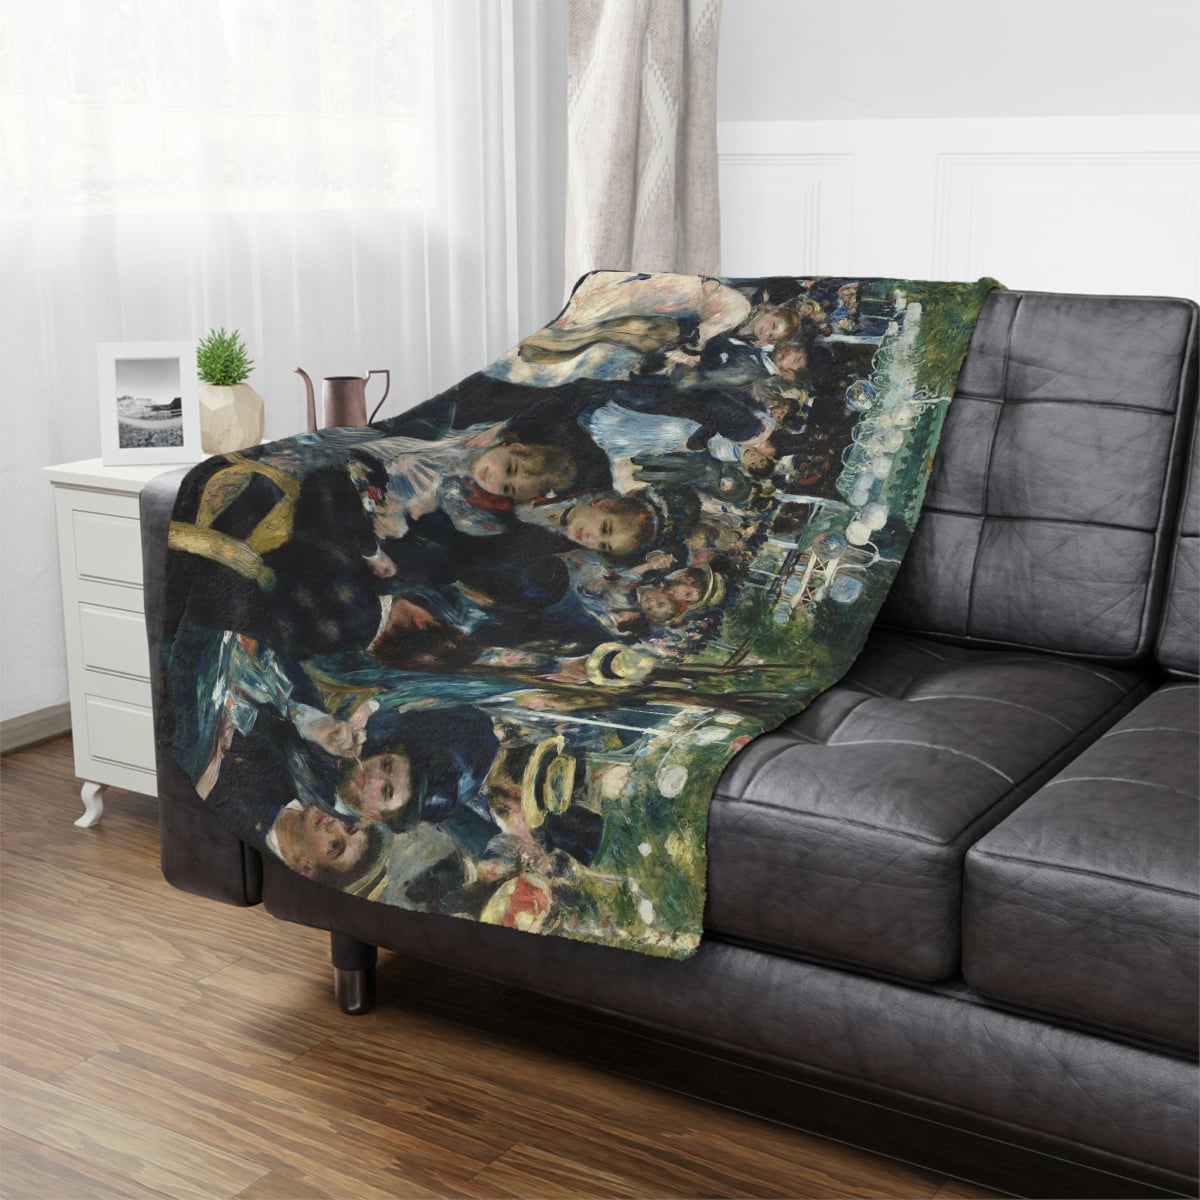 The perfect blend of art and warmth in our Renoir-inspired blanket